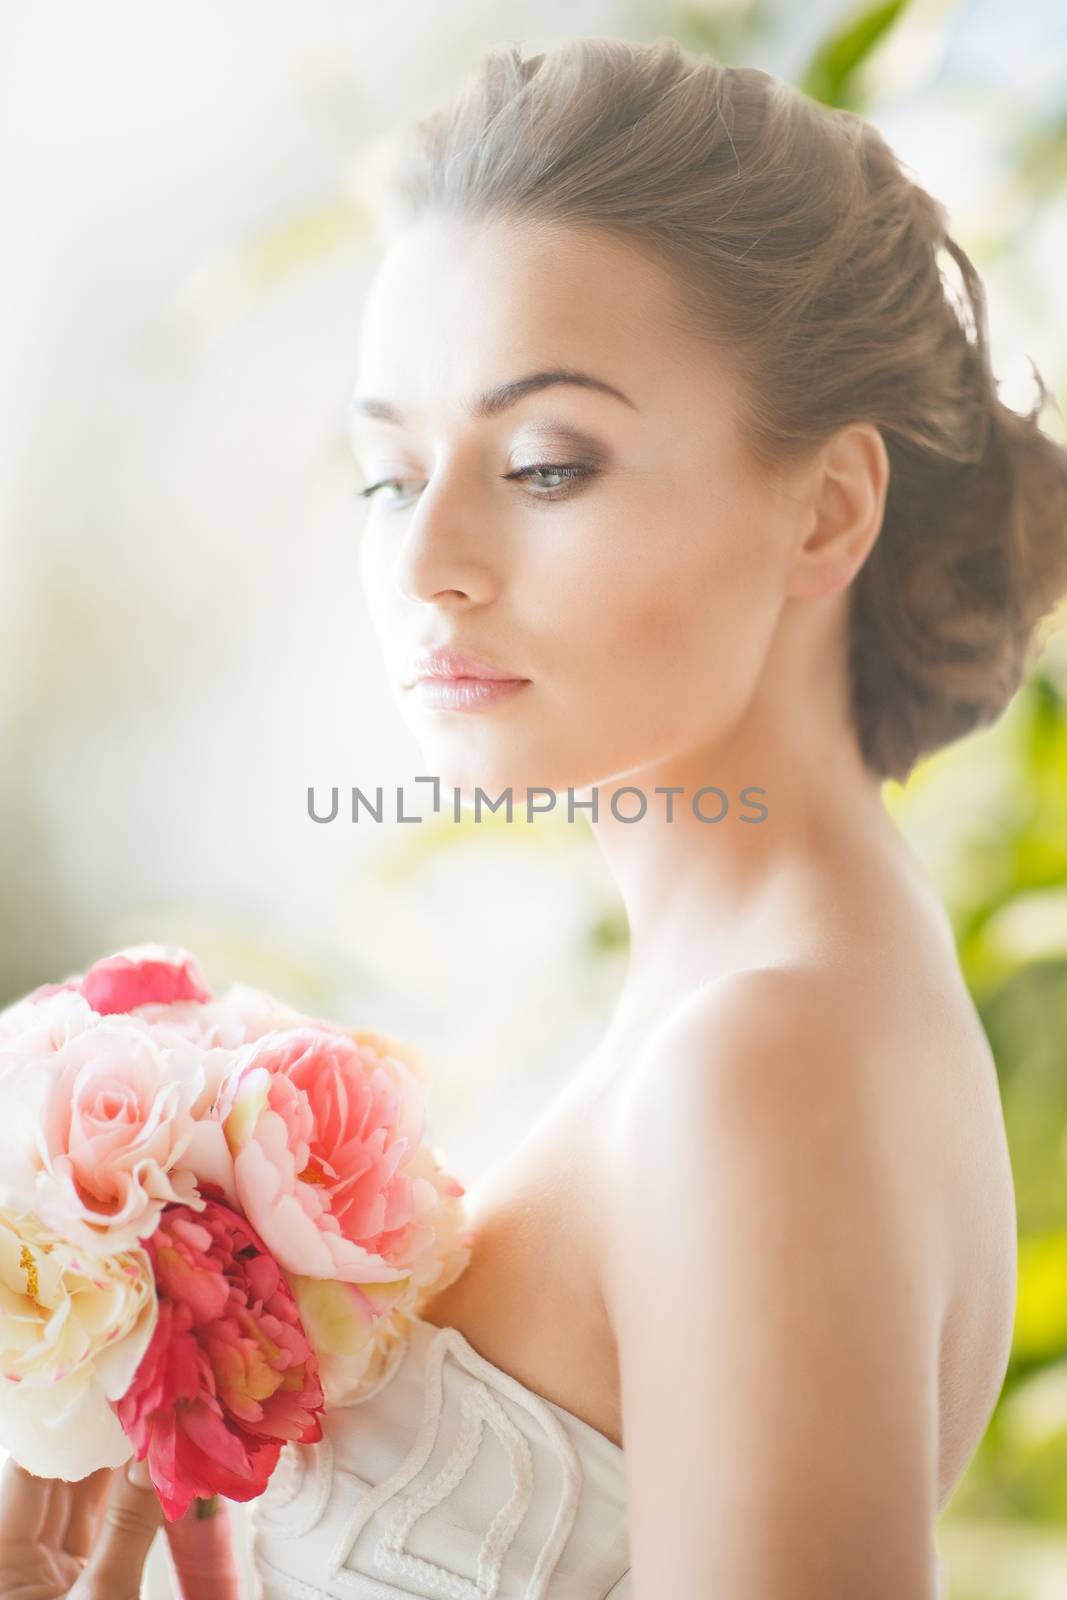 wedding and beauty concept - young woman with bouquet of flowers